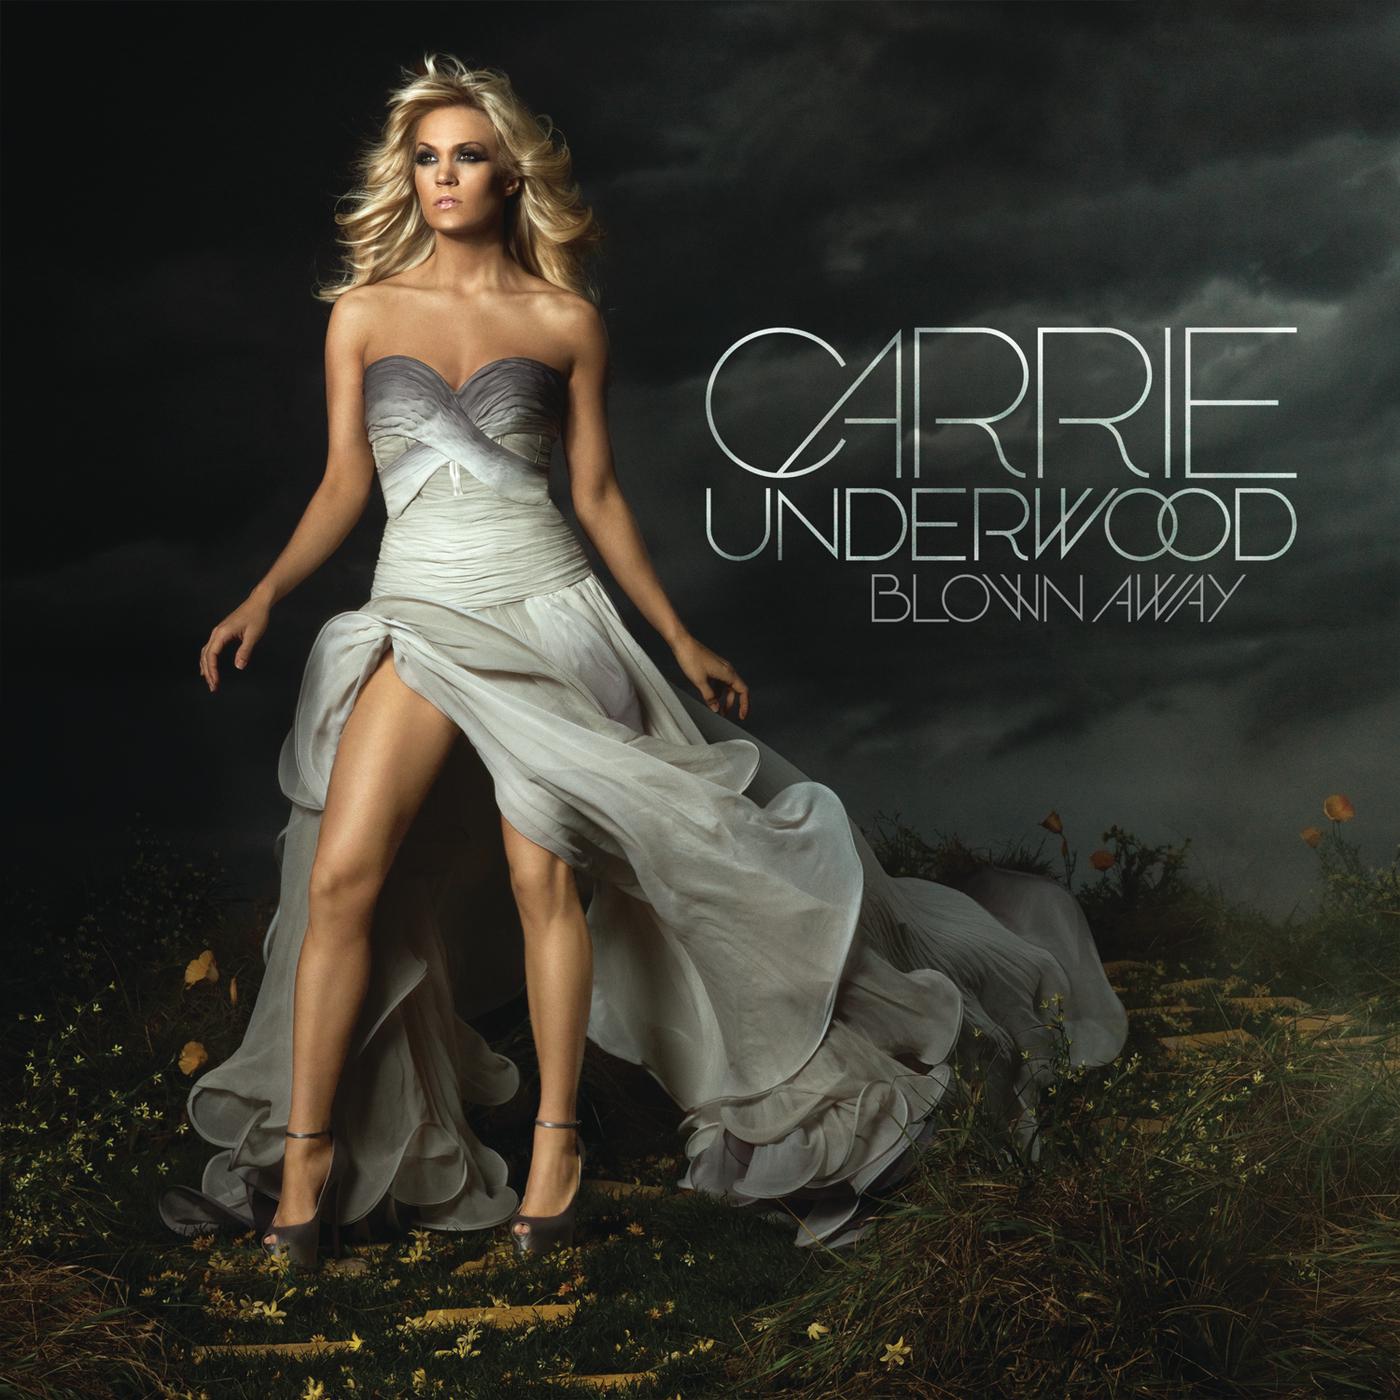 Carrie Underwood - Wine After Whiskey